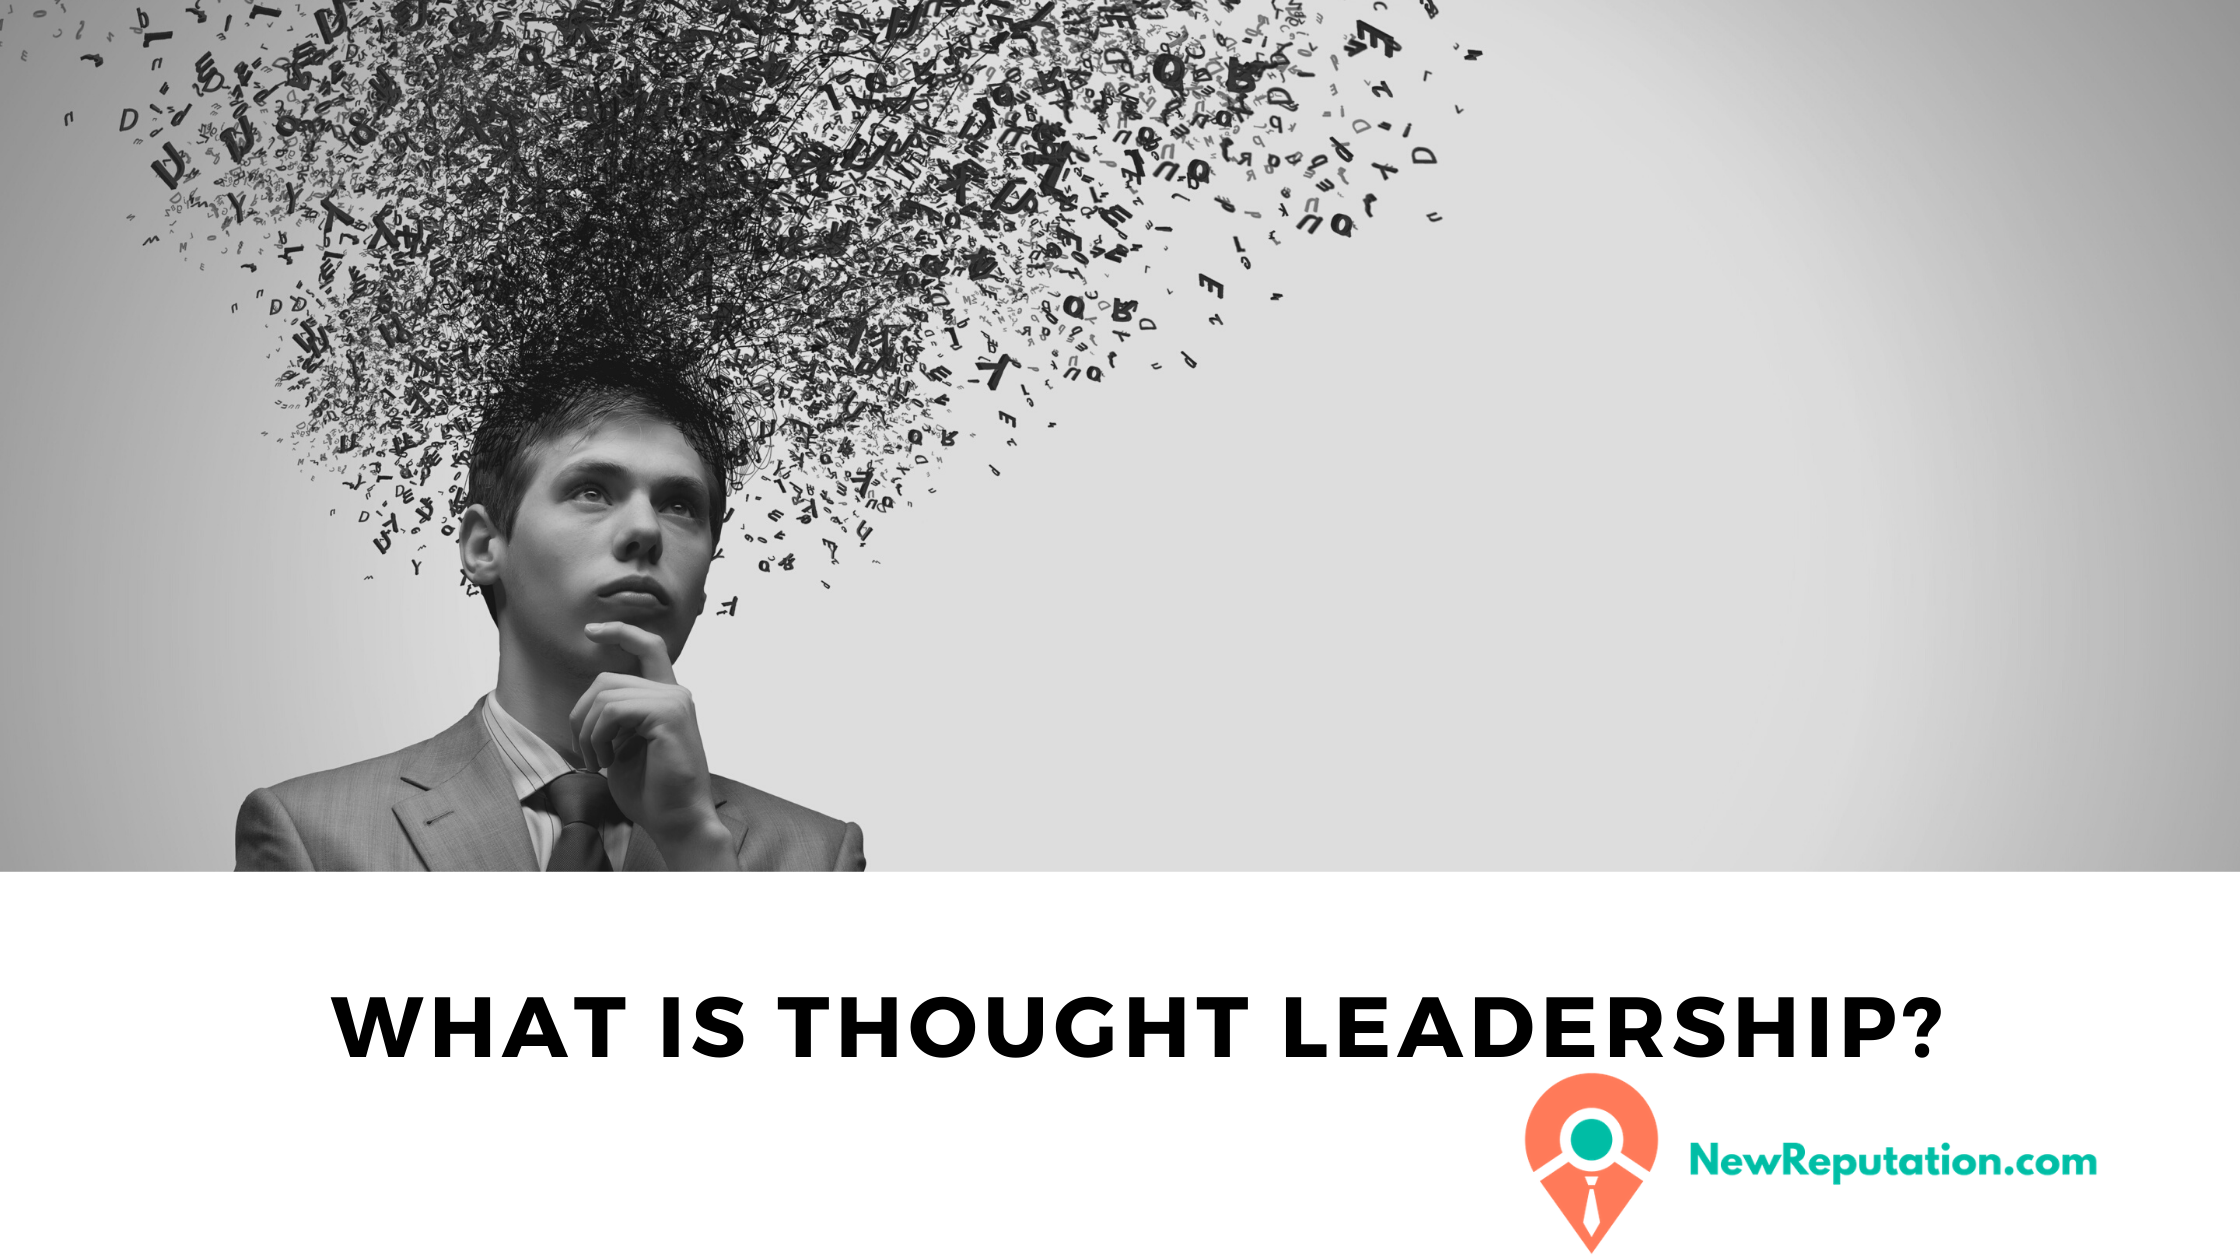 What Is Thought Leadership?